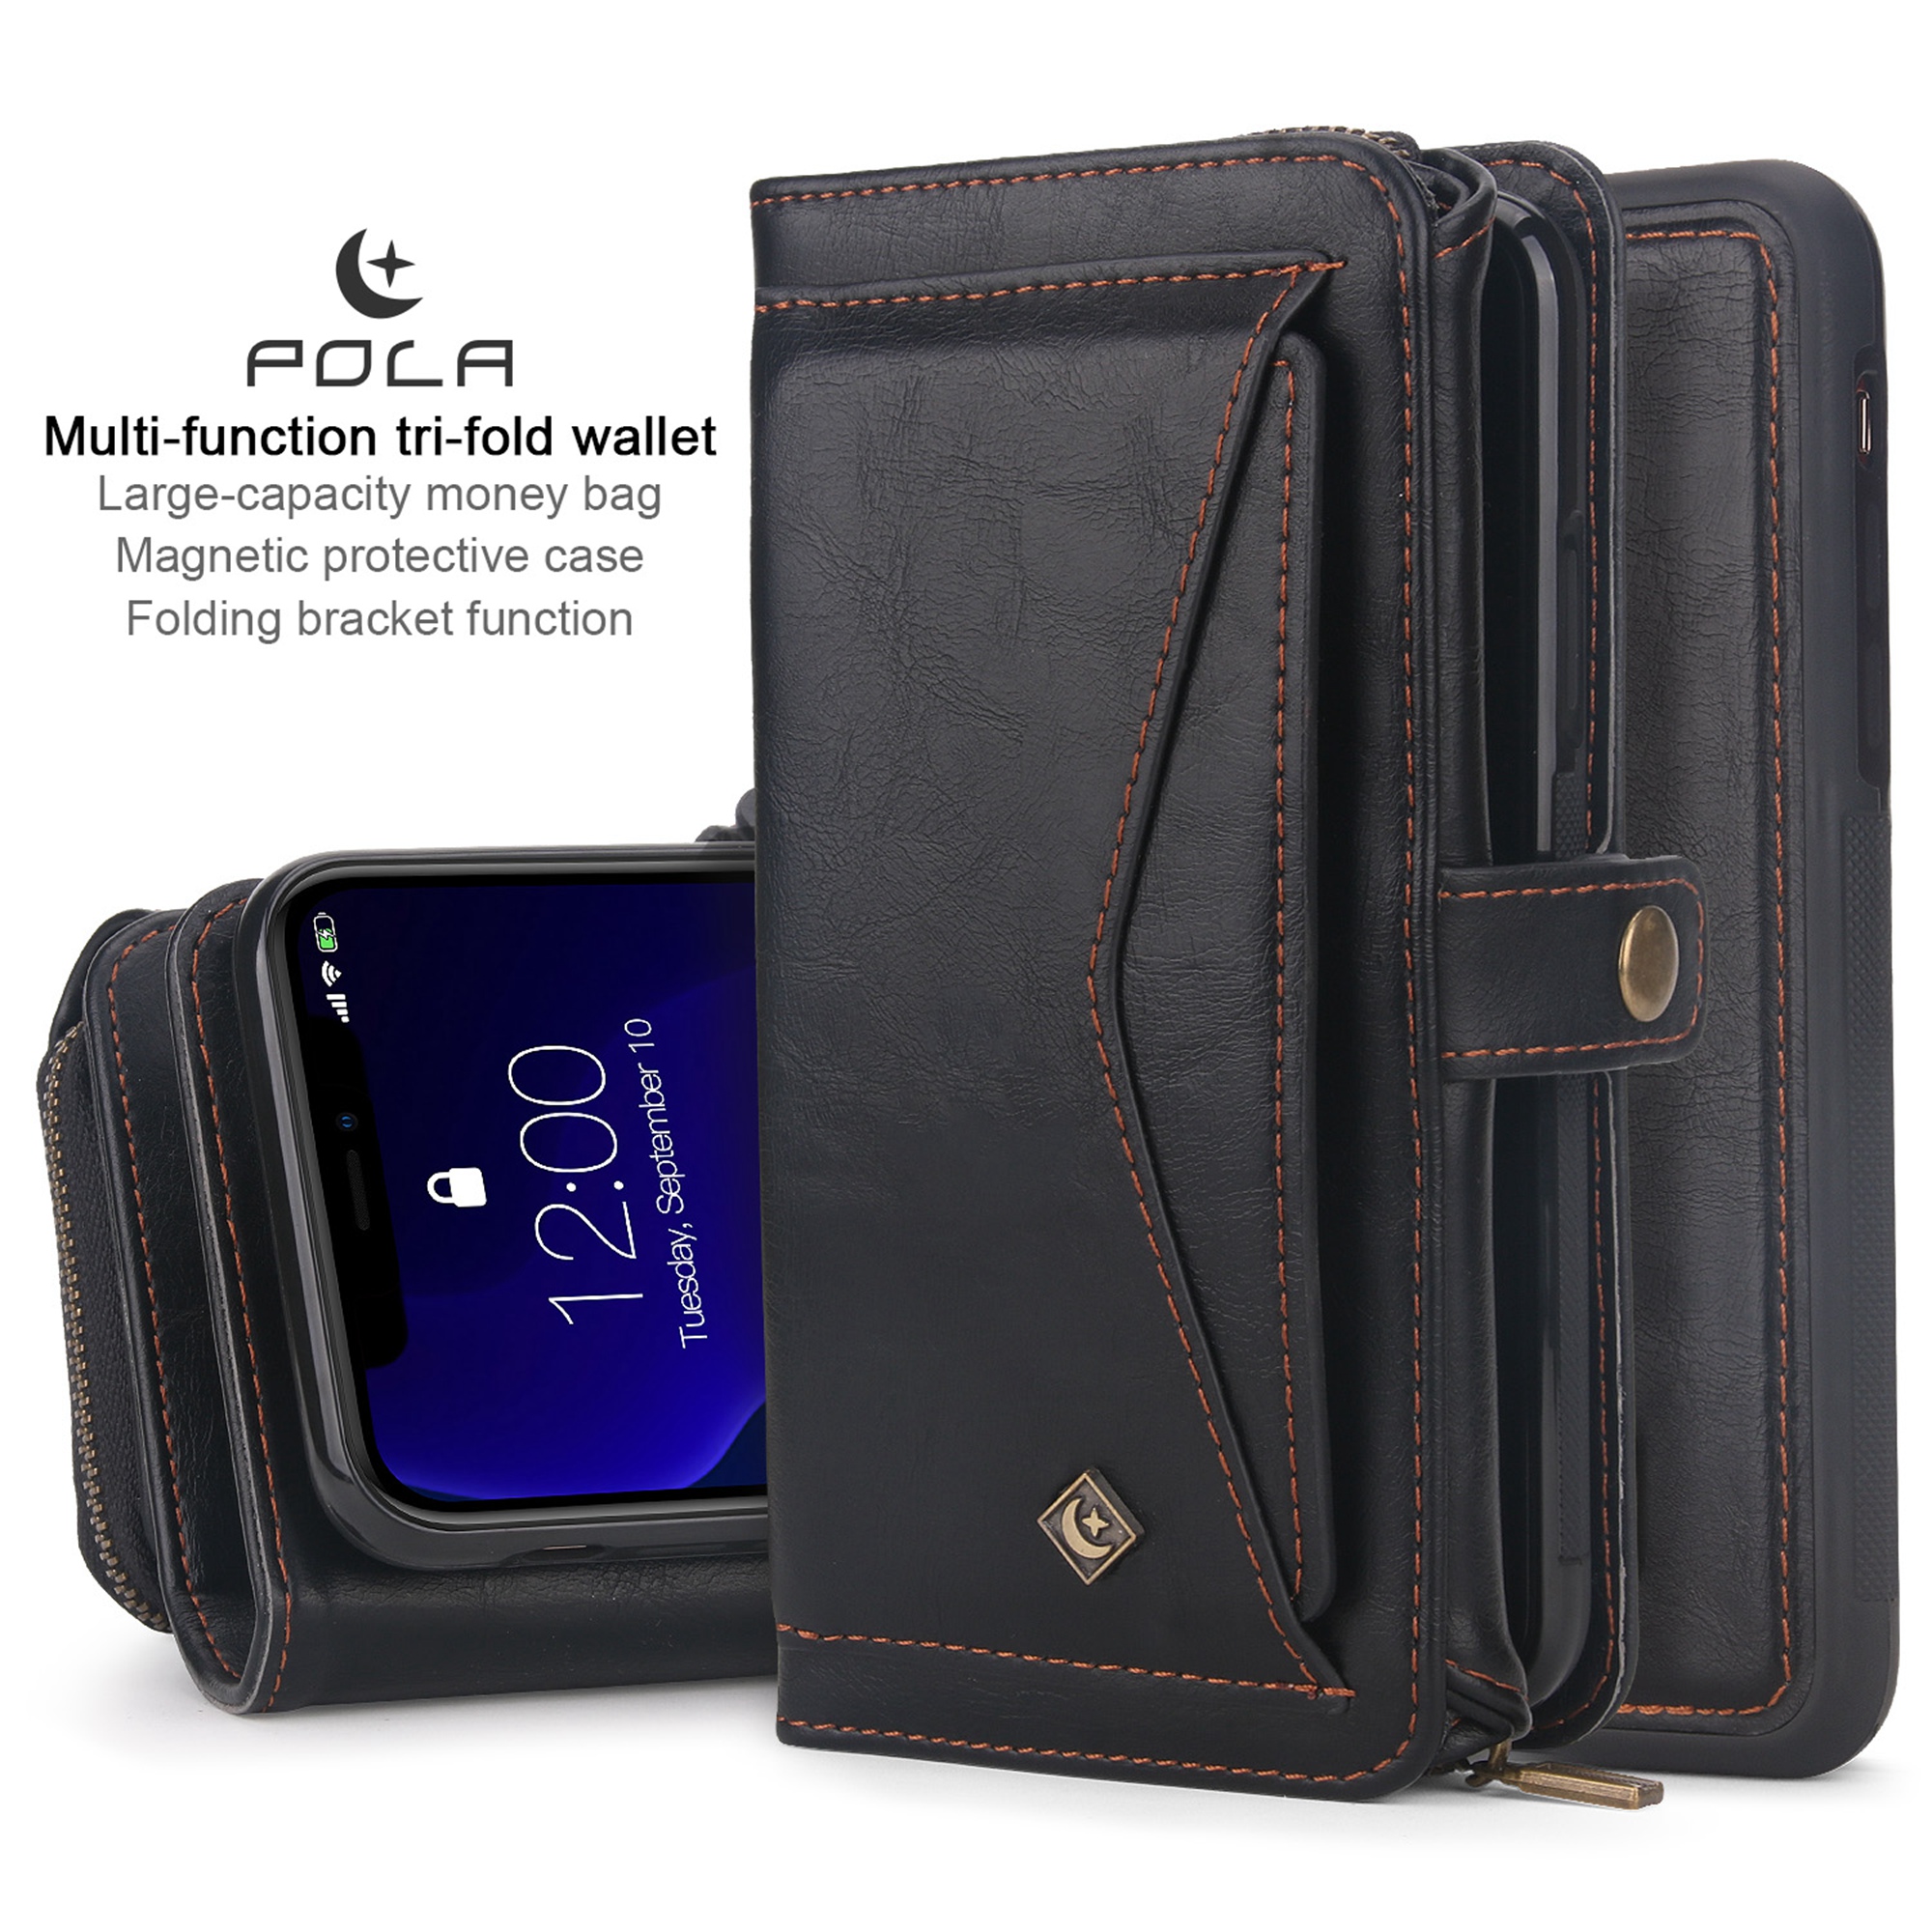 iPhone 11Pro Max 6.5 inch Wallet Case, Dteck 2 in 1 Leather Zipper Purse Multi-Function Tri-fold Wallet Case Detachable Magnetic Phone Cover with 14 Card Slots Money Pocket For iPhone 11 Pro Max,Black - image 3 of 11